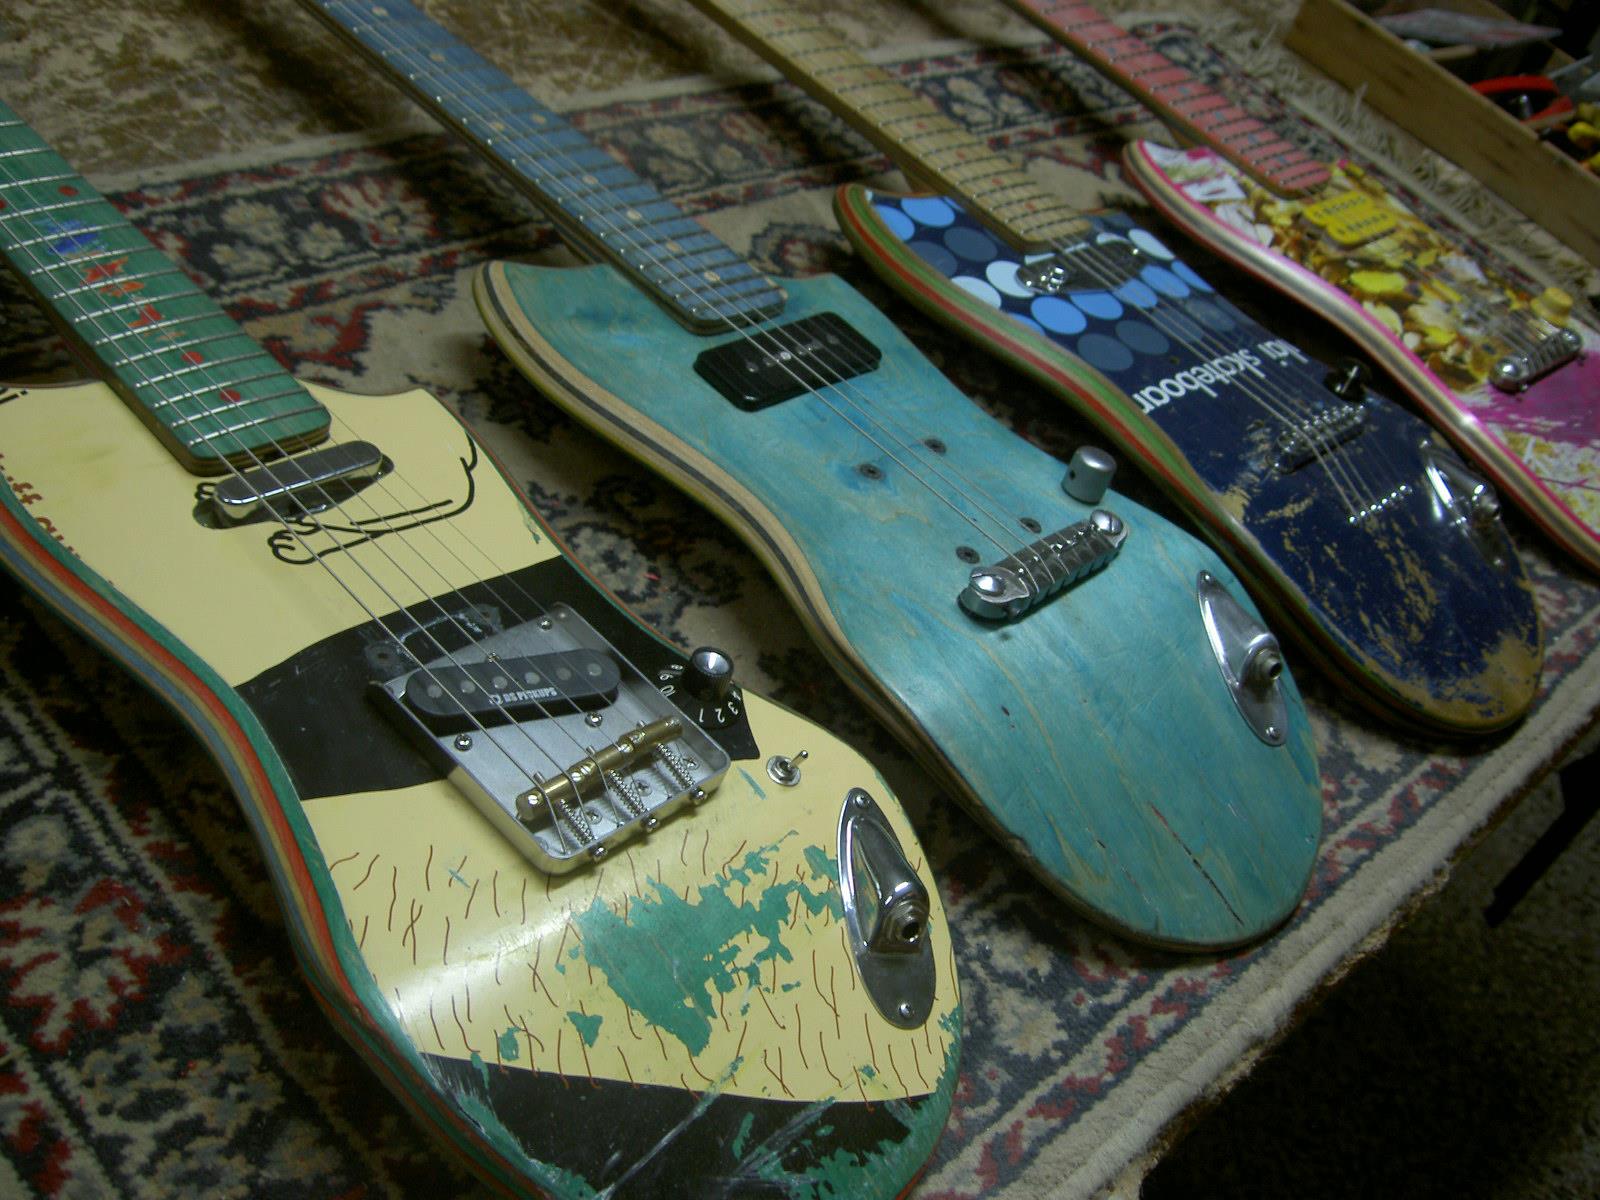 recycled-skateboards-decks-electric-guitars-0